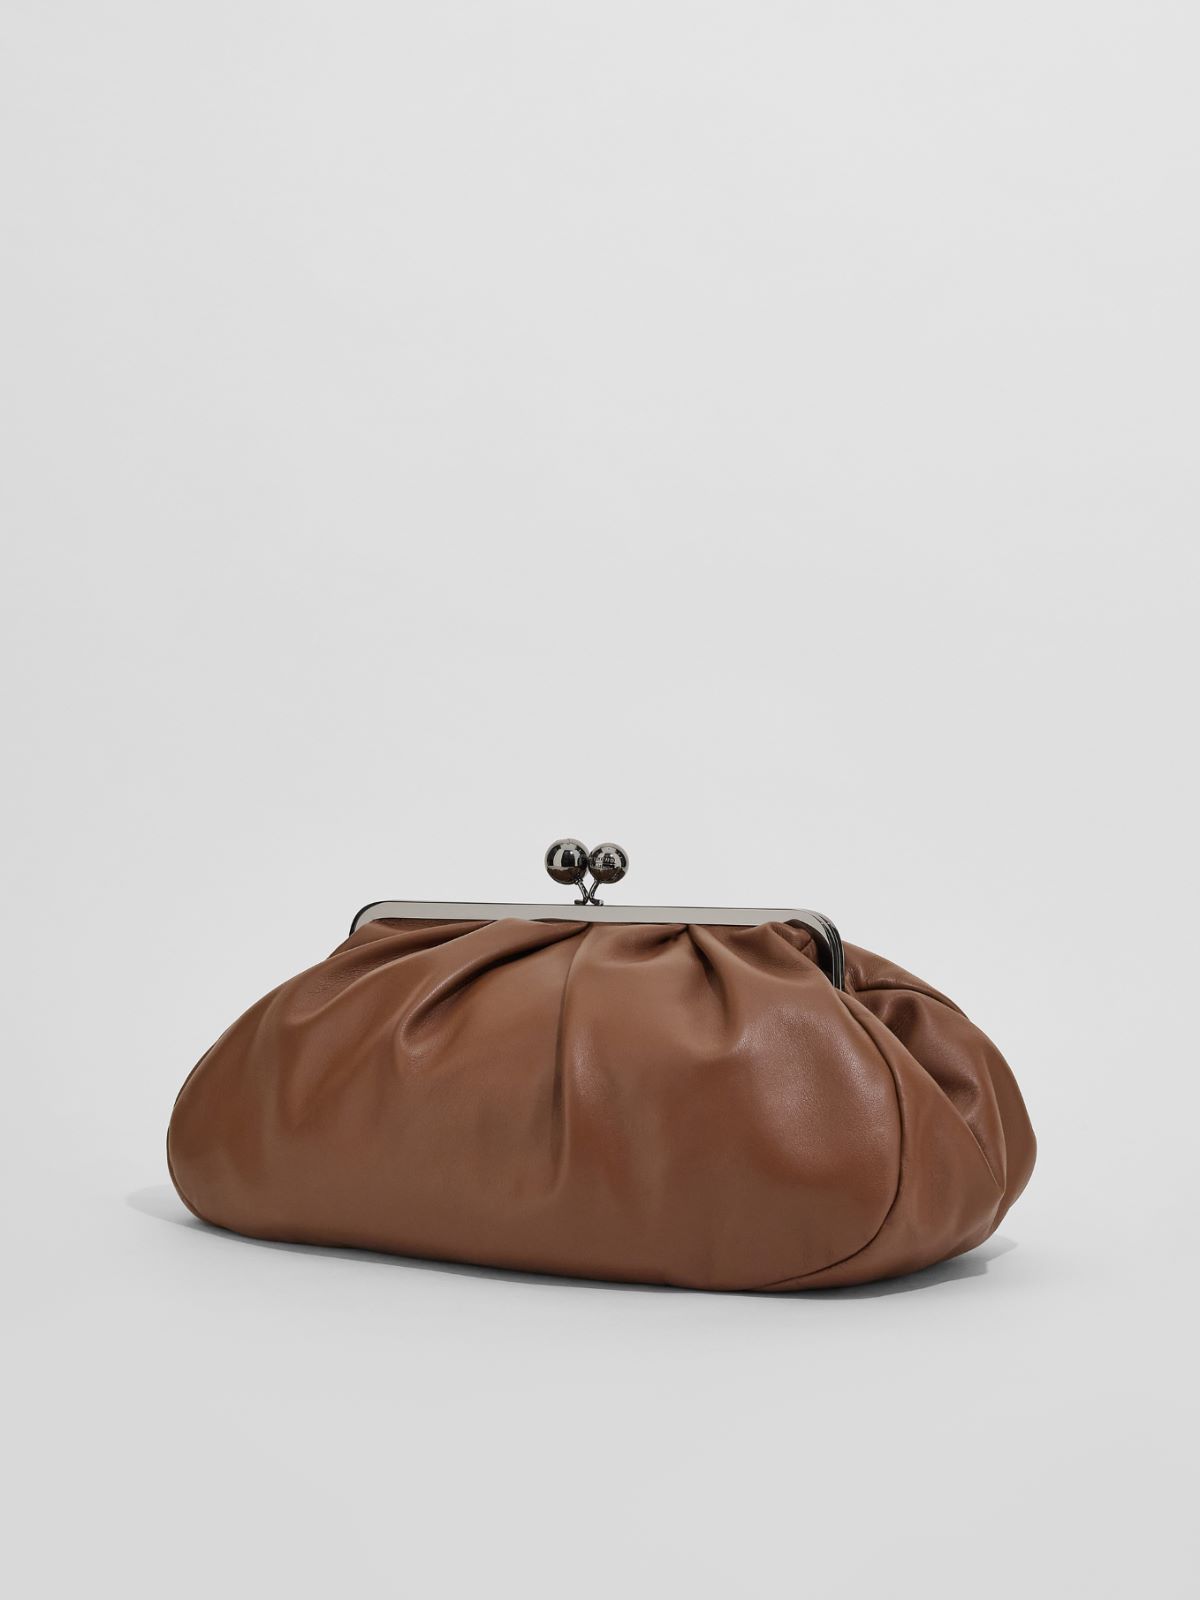 Large leather Pasticcino Bag  - TOBACCO - Weekend Max Mara - 2